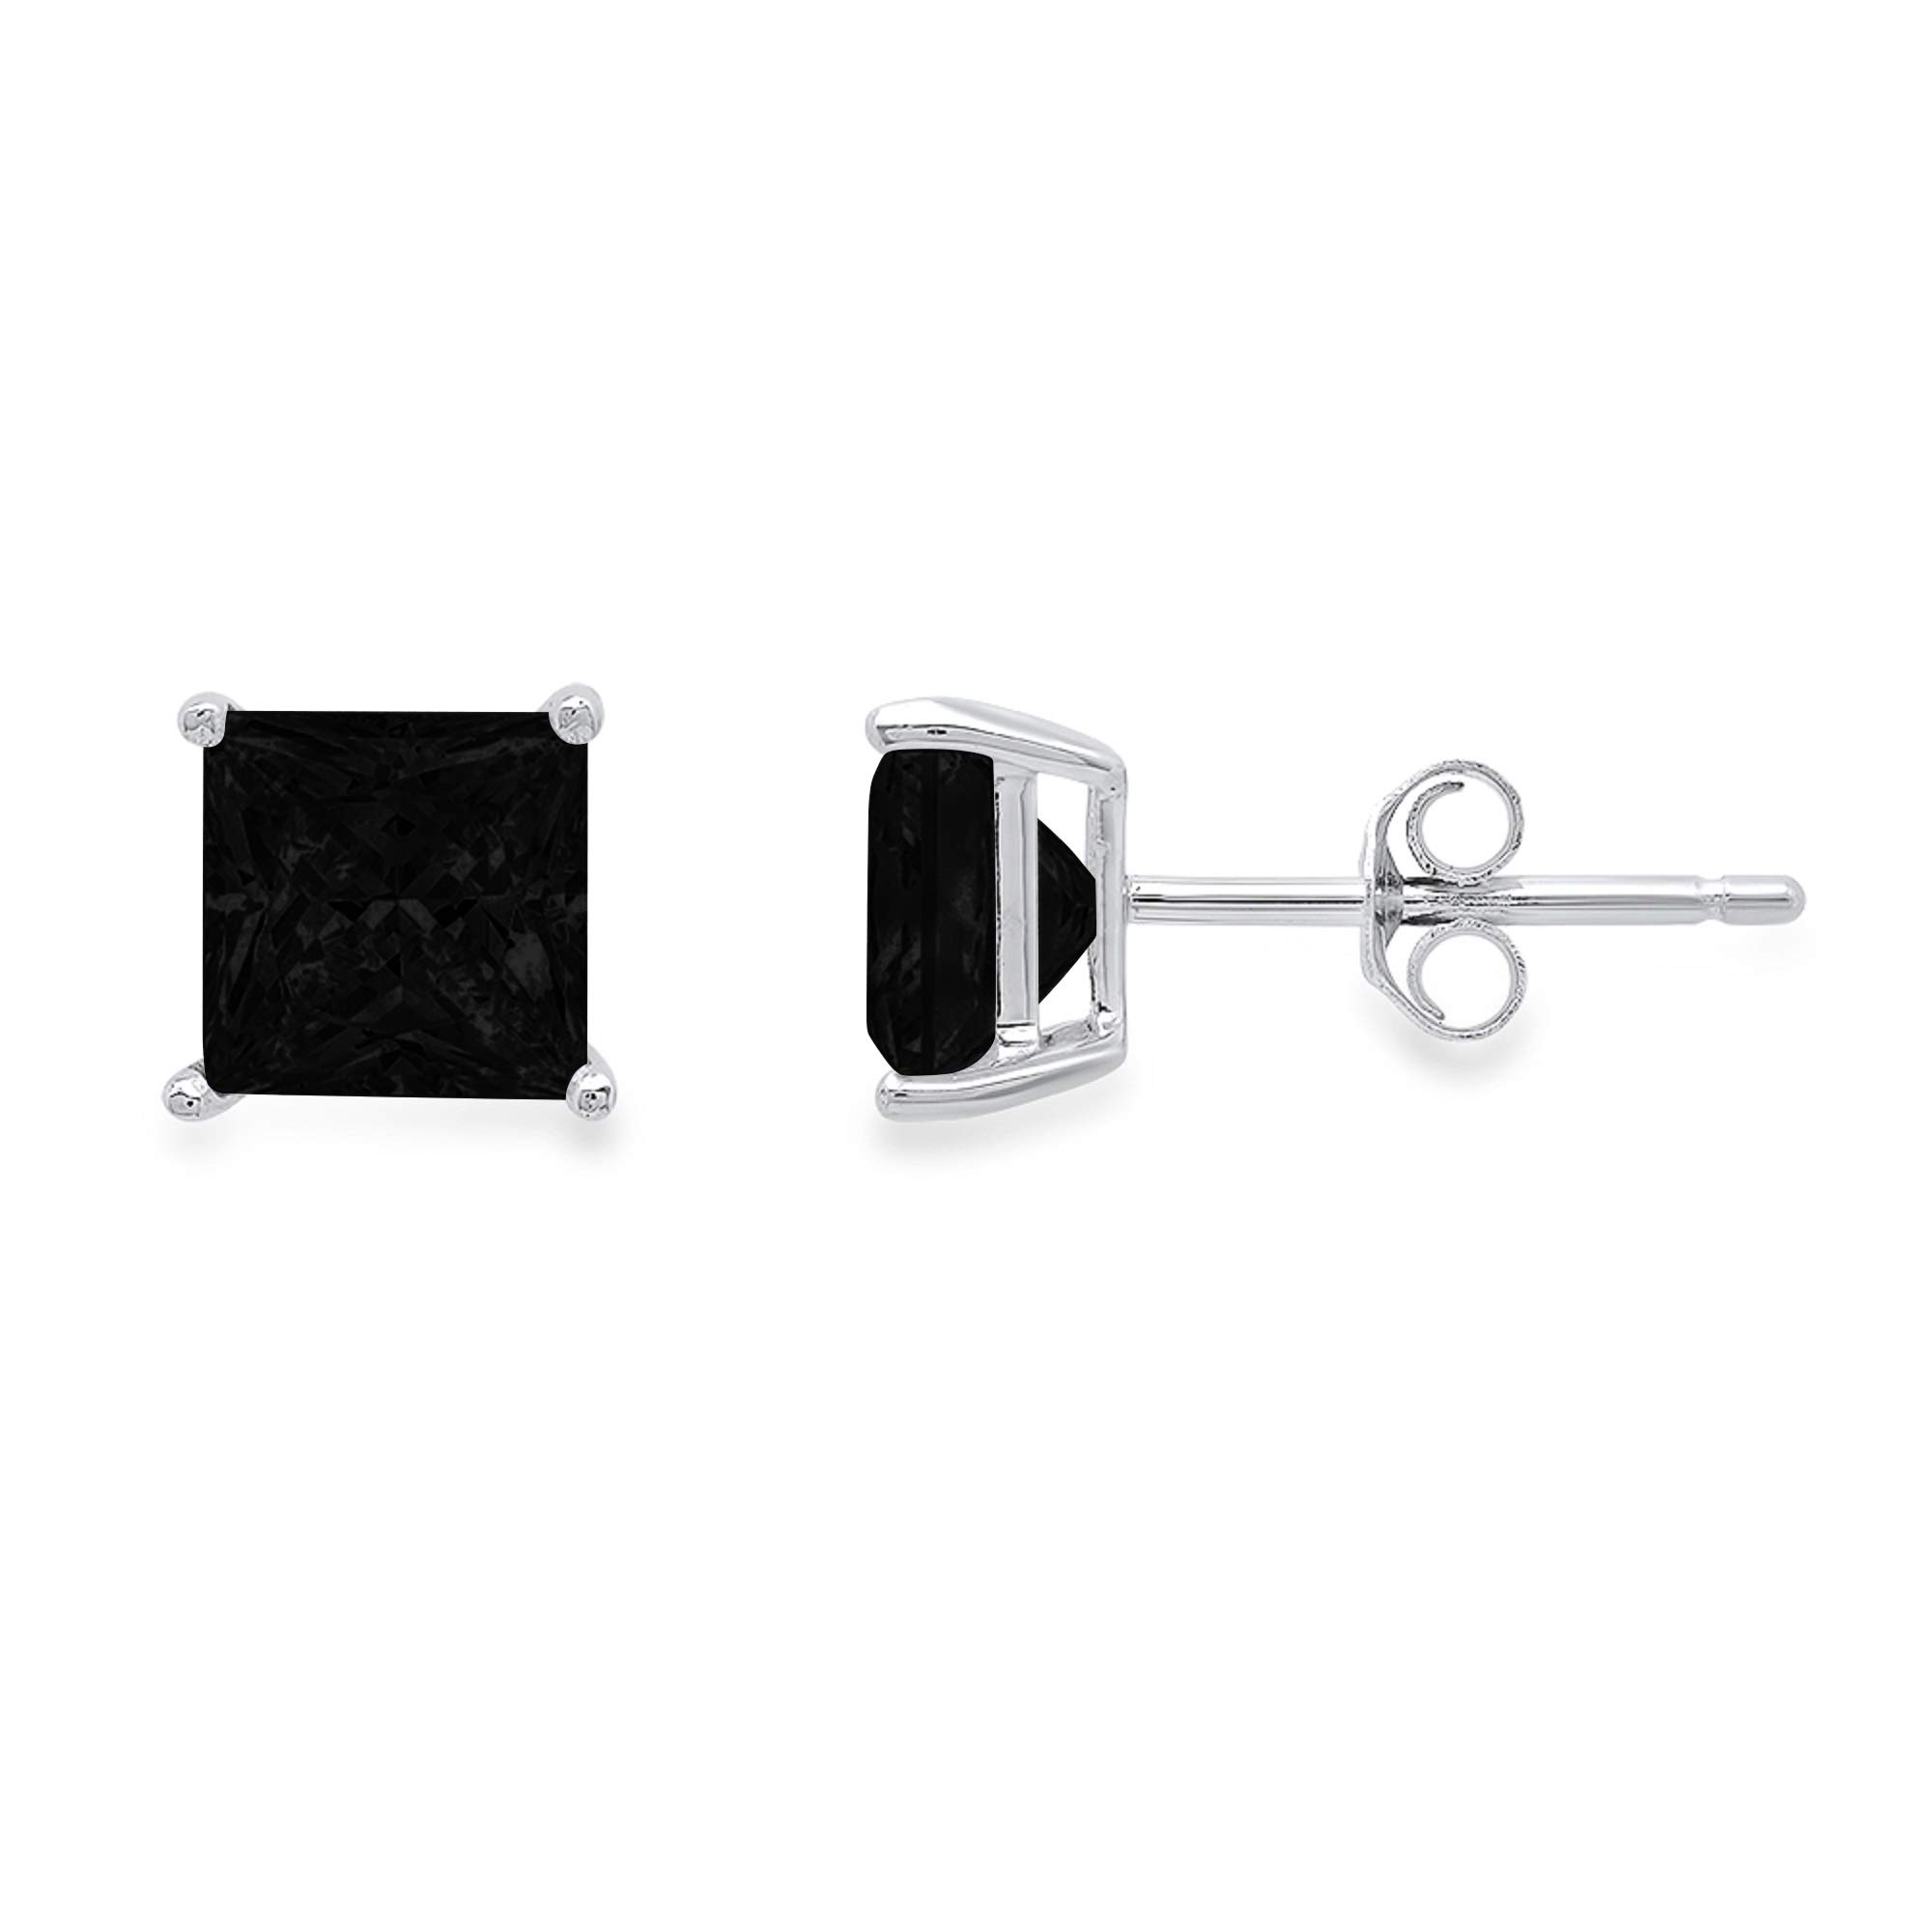 2.9ct Brilliant Princess Cut Solitaire Flawless Genuine Natural Black Onyx Gemstone Unisex Pair of Stud Designer Earrings Solid 14k White Gold Push Back conflict free Jewelry